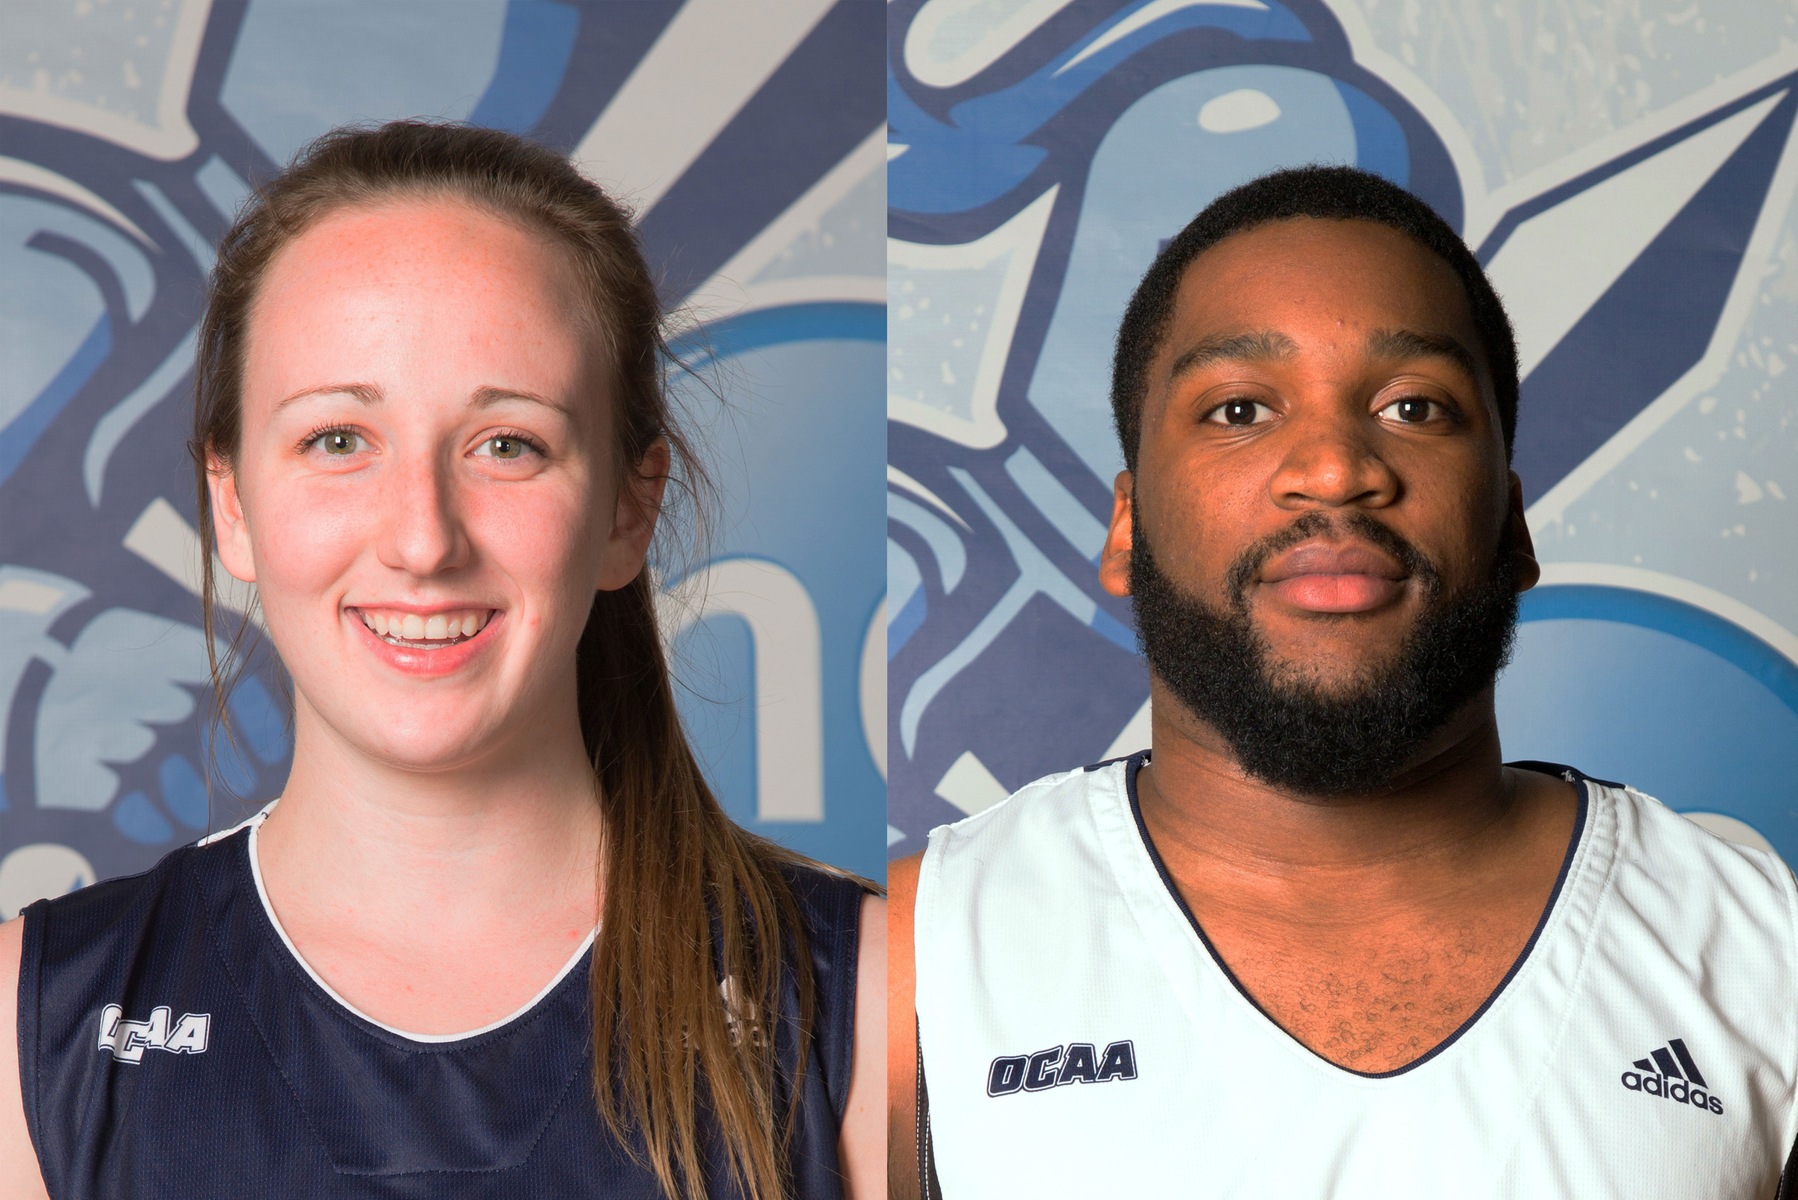 McCabe and Morrison named Athletes of the Week